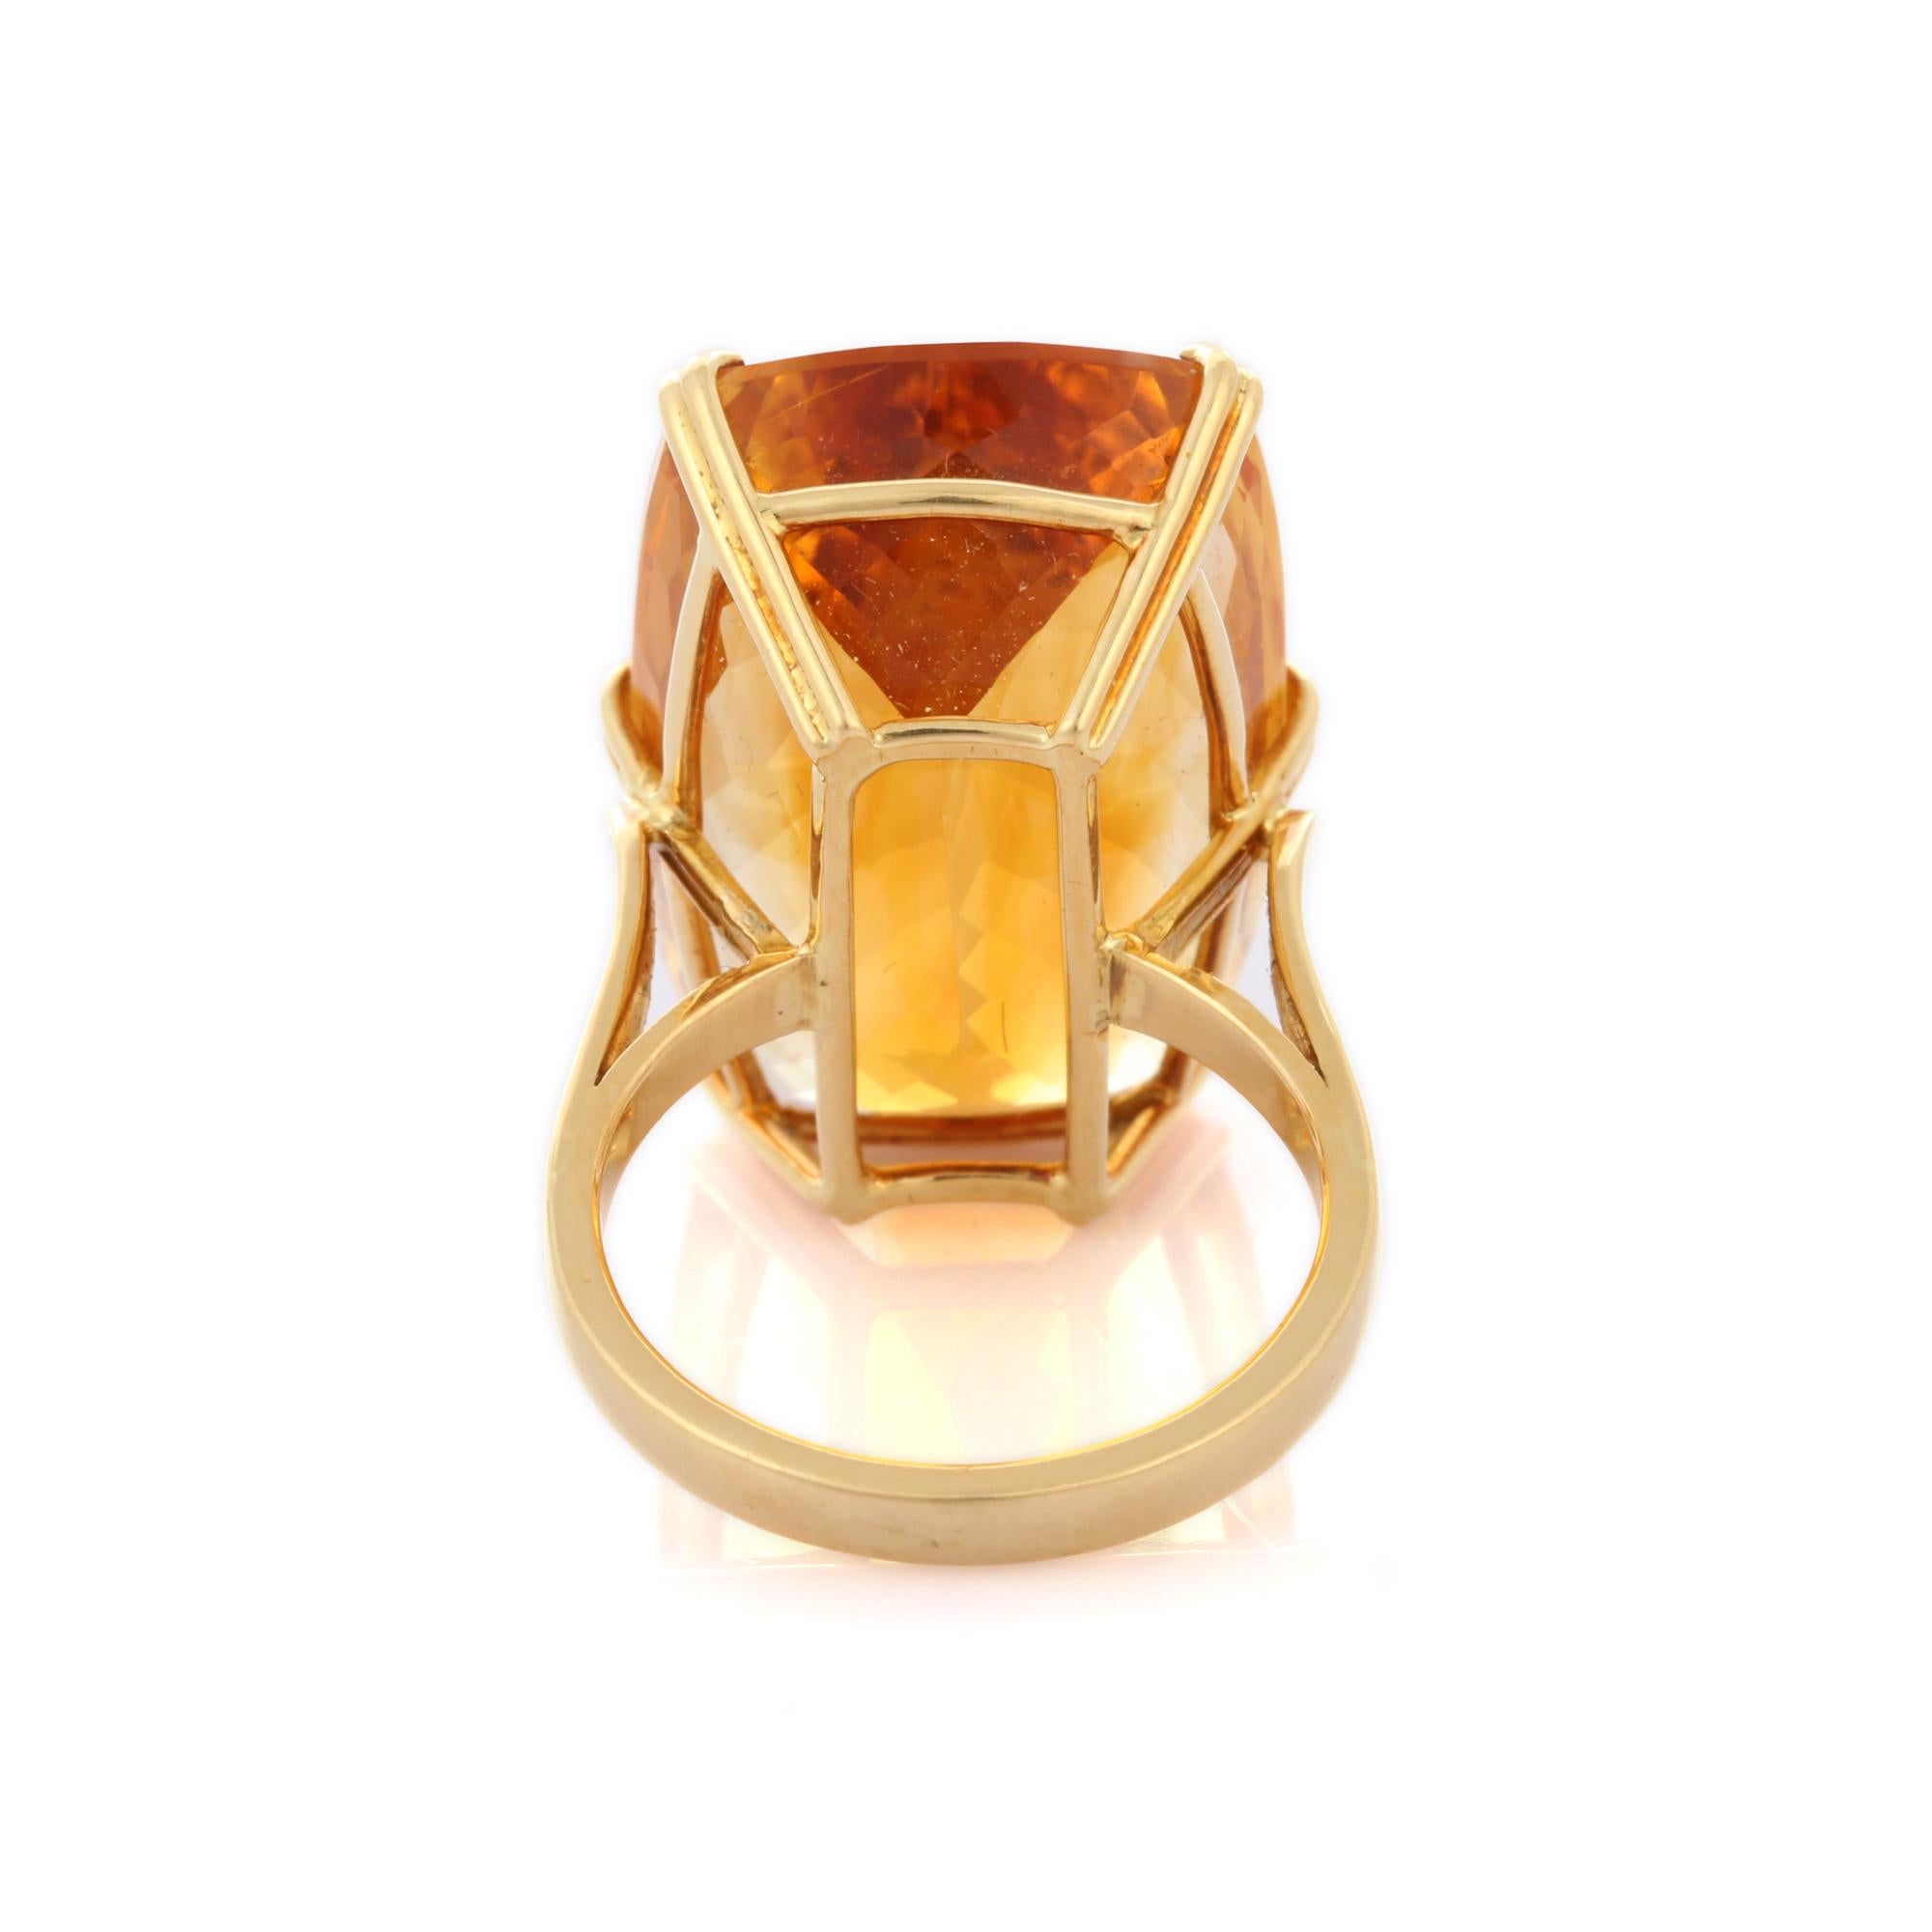 For Sale:  28.8 Ct Cushion Cut Citrine Gemstone Cocktail Ring in 18K Yellow Gold 5